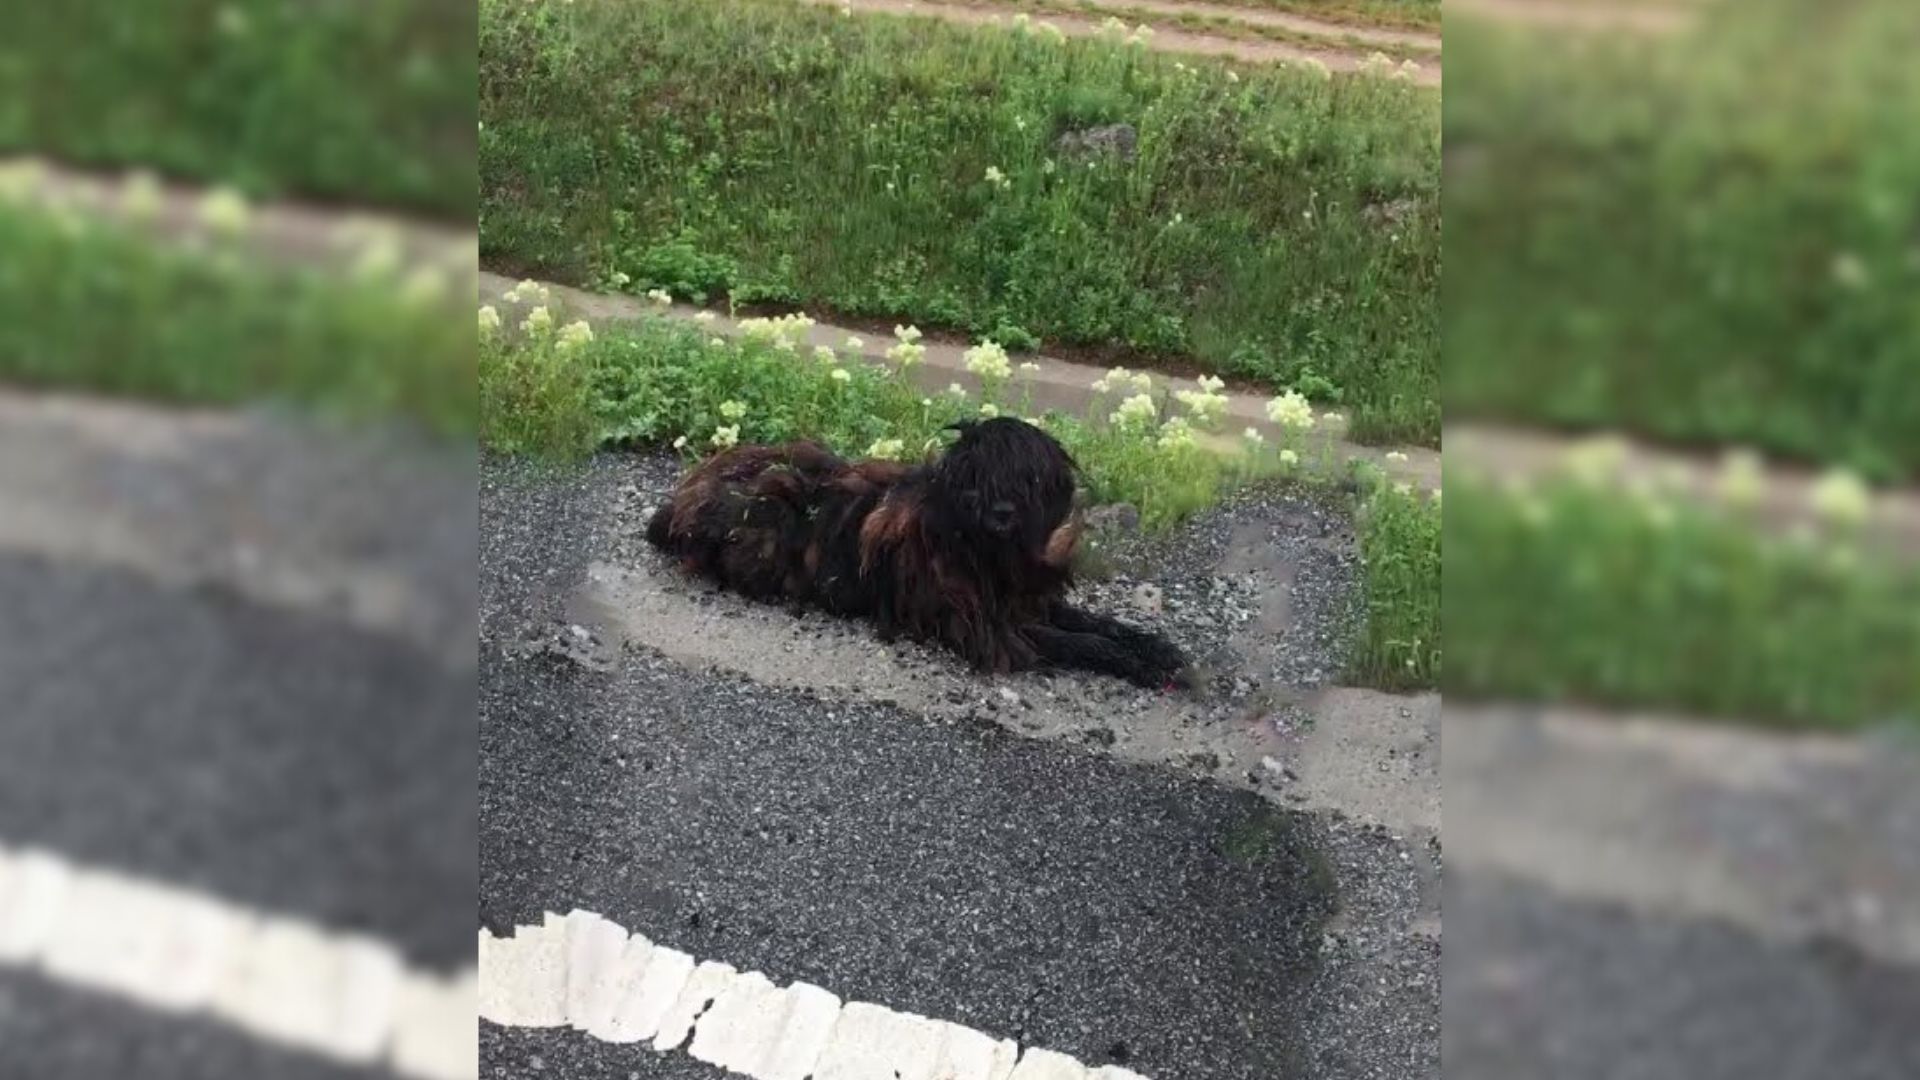 Rescuers Came Across A Furry Animal On The Road And Then Realized What It Actually Was